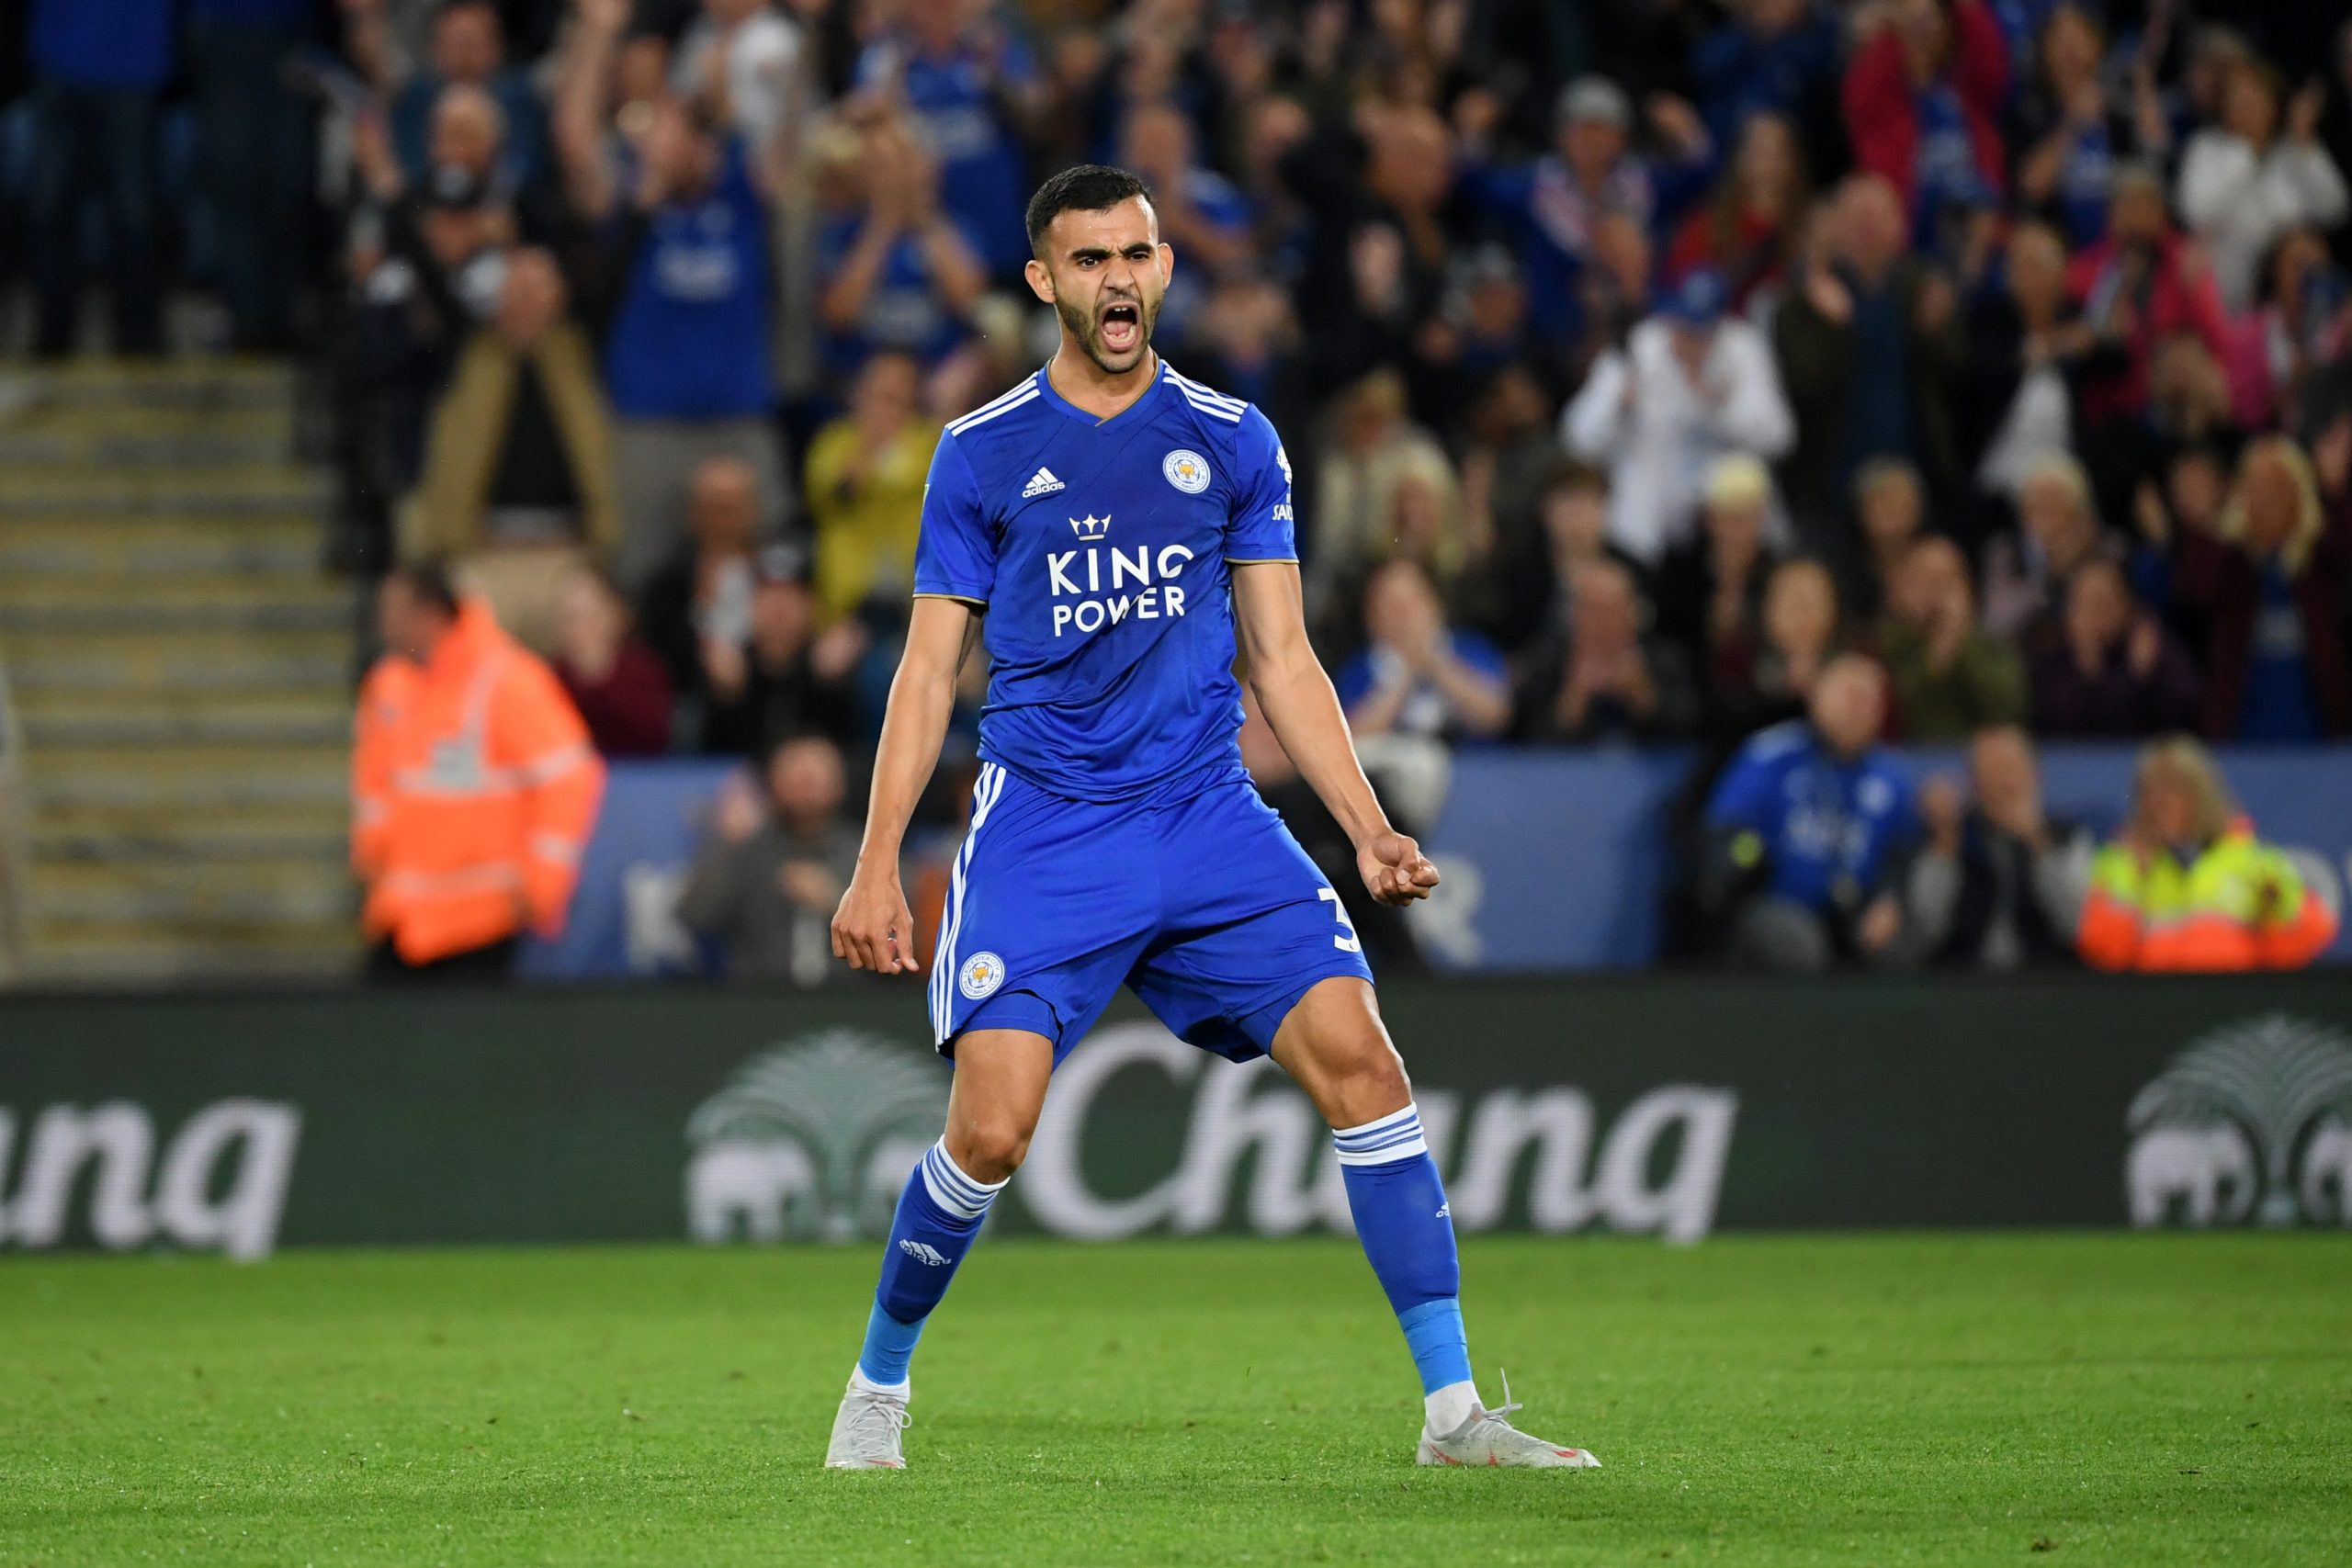 Rachid Ghezzal playing for Leicester City in the Carabao Cup in the 2018-19 season.